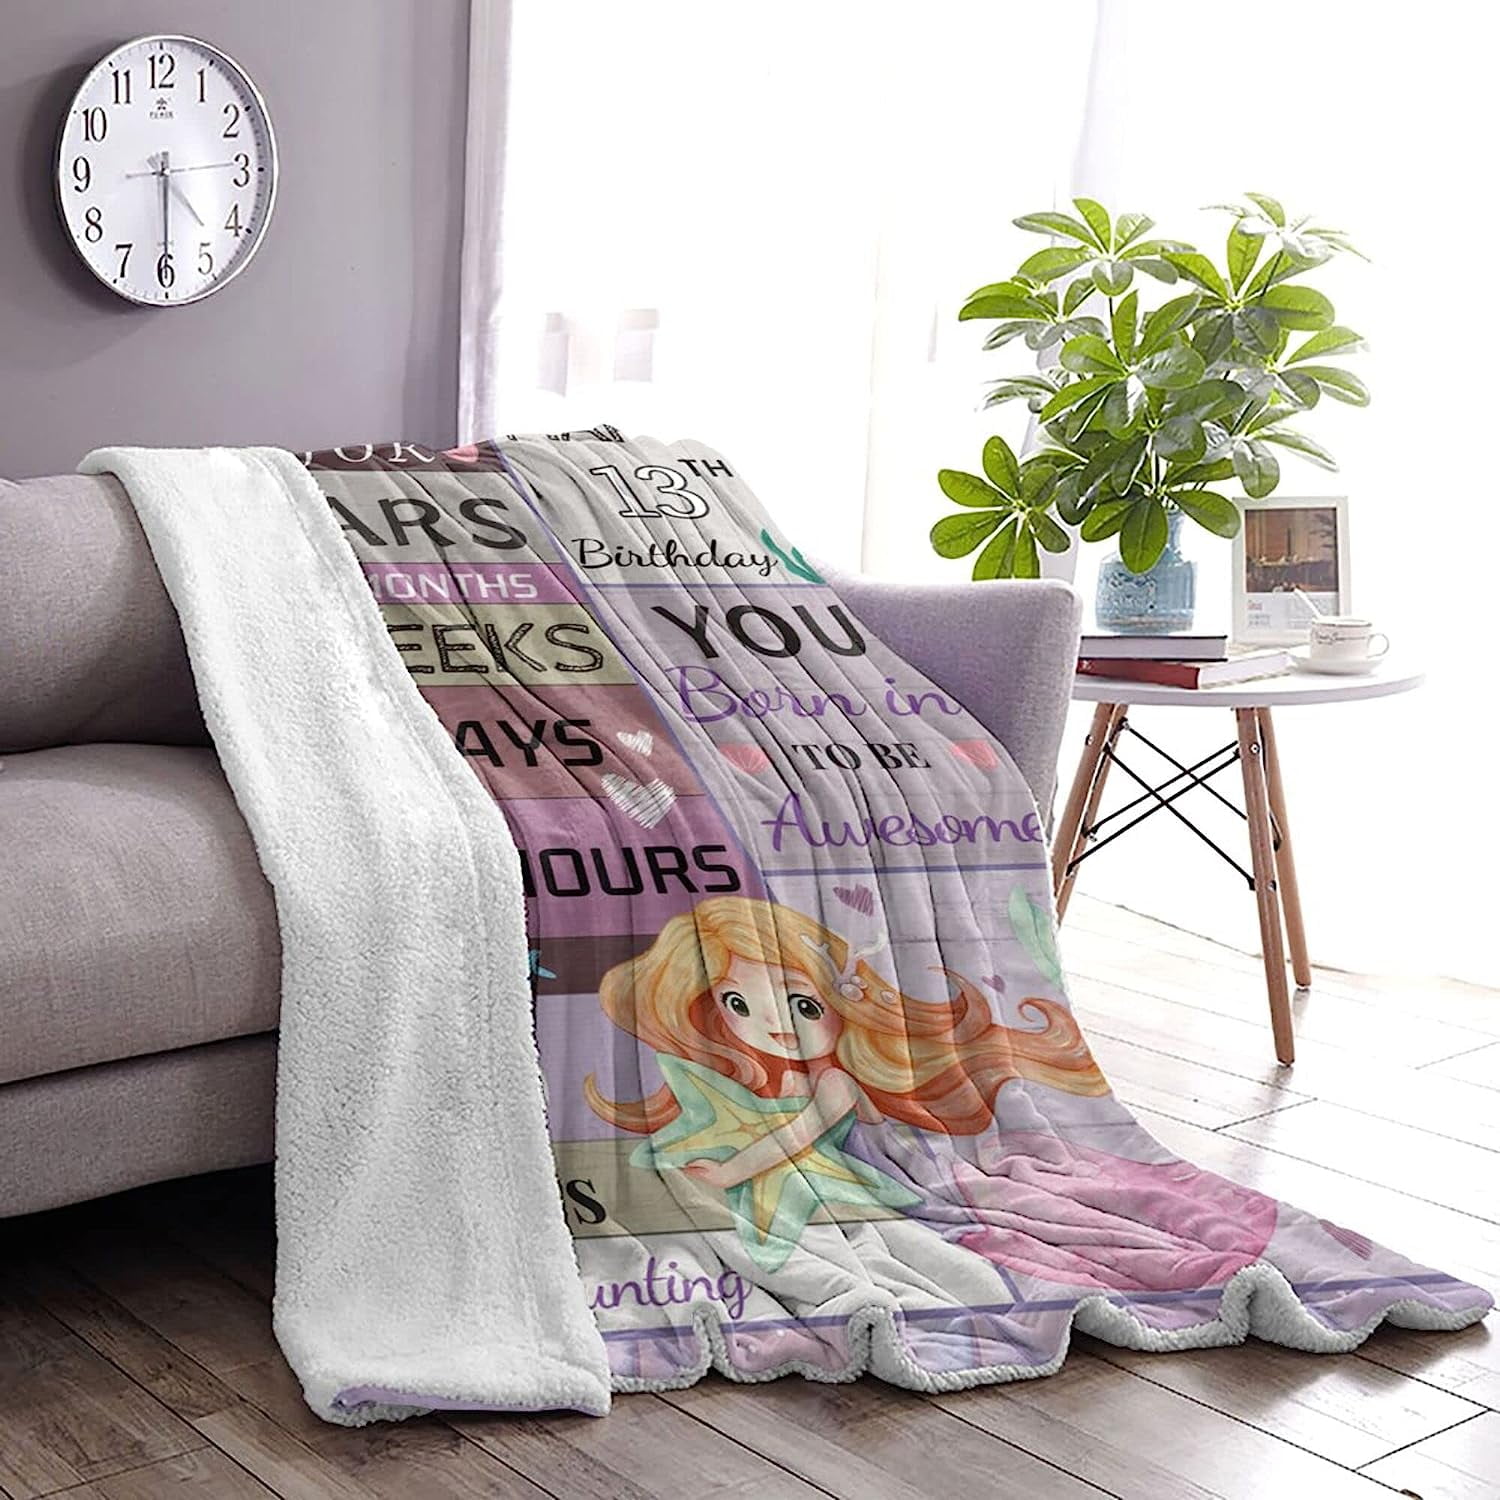  Joyloce Sweet 14th Birthday Gifts for Girls Blanket 60x50,  Sweet 14 Gifts for Girls - Best 14th Birthday Gift Ideas - Funny Gift for  14-Year-Old Girl - 14th Bday Party Decorations